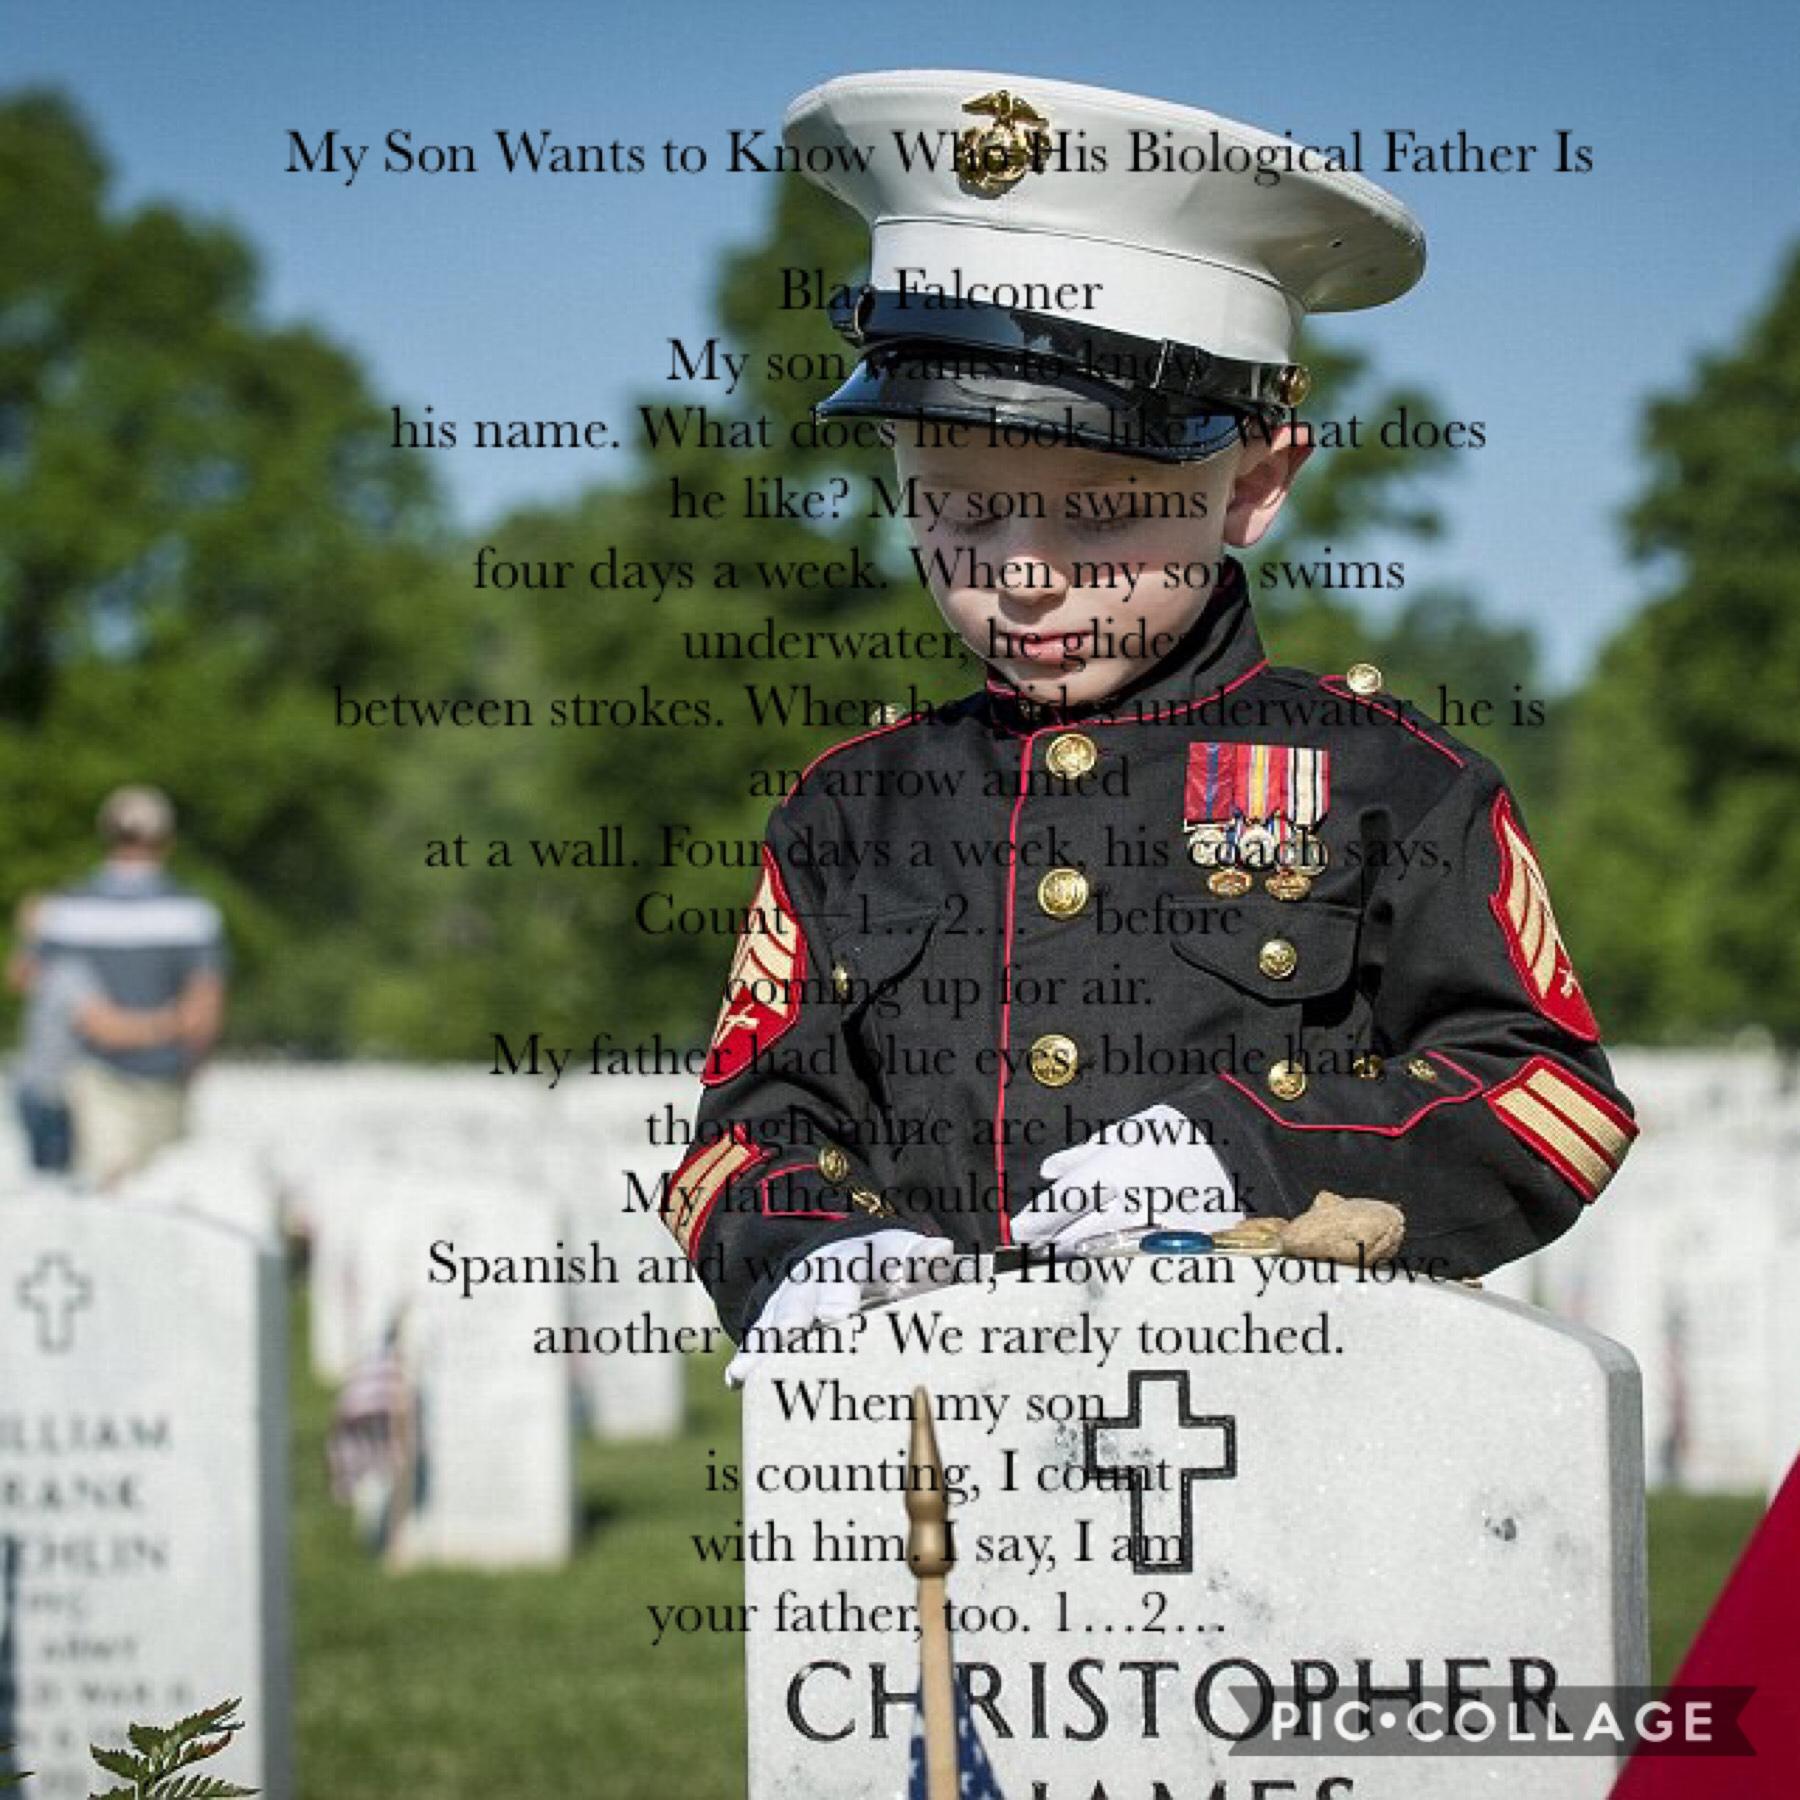 My Son Wants to Know Who His Biological Father Is by Blas Falconer “Today my son came up to me and asked me about his father. I told him that his father was a hero and that his father was a courageous and honorable man.”